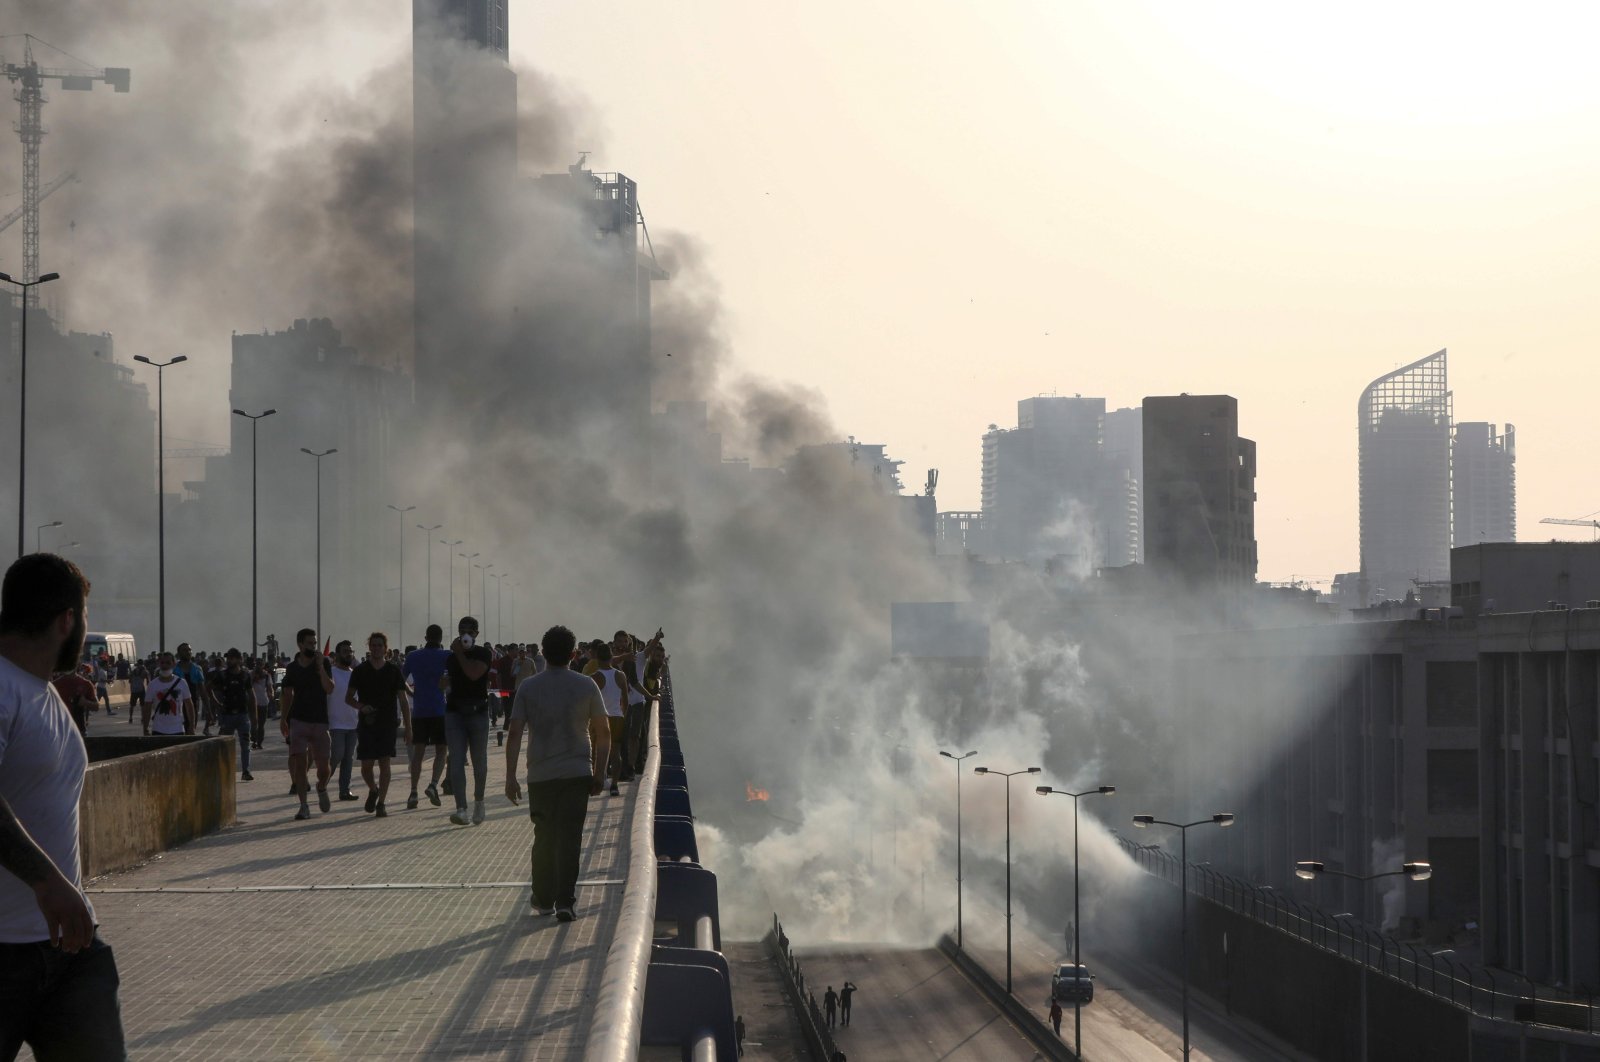 Lebanese protesters walk away from tear gas fired by riot police amid clashes following a demonstration in central Beirut on June 6, 2020. (AFP Photo)